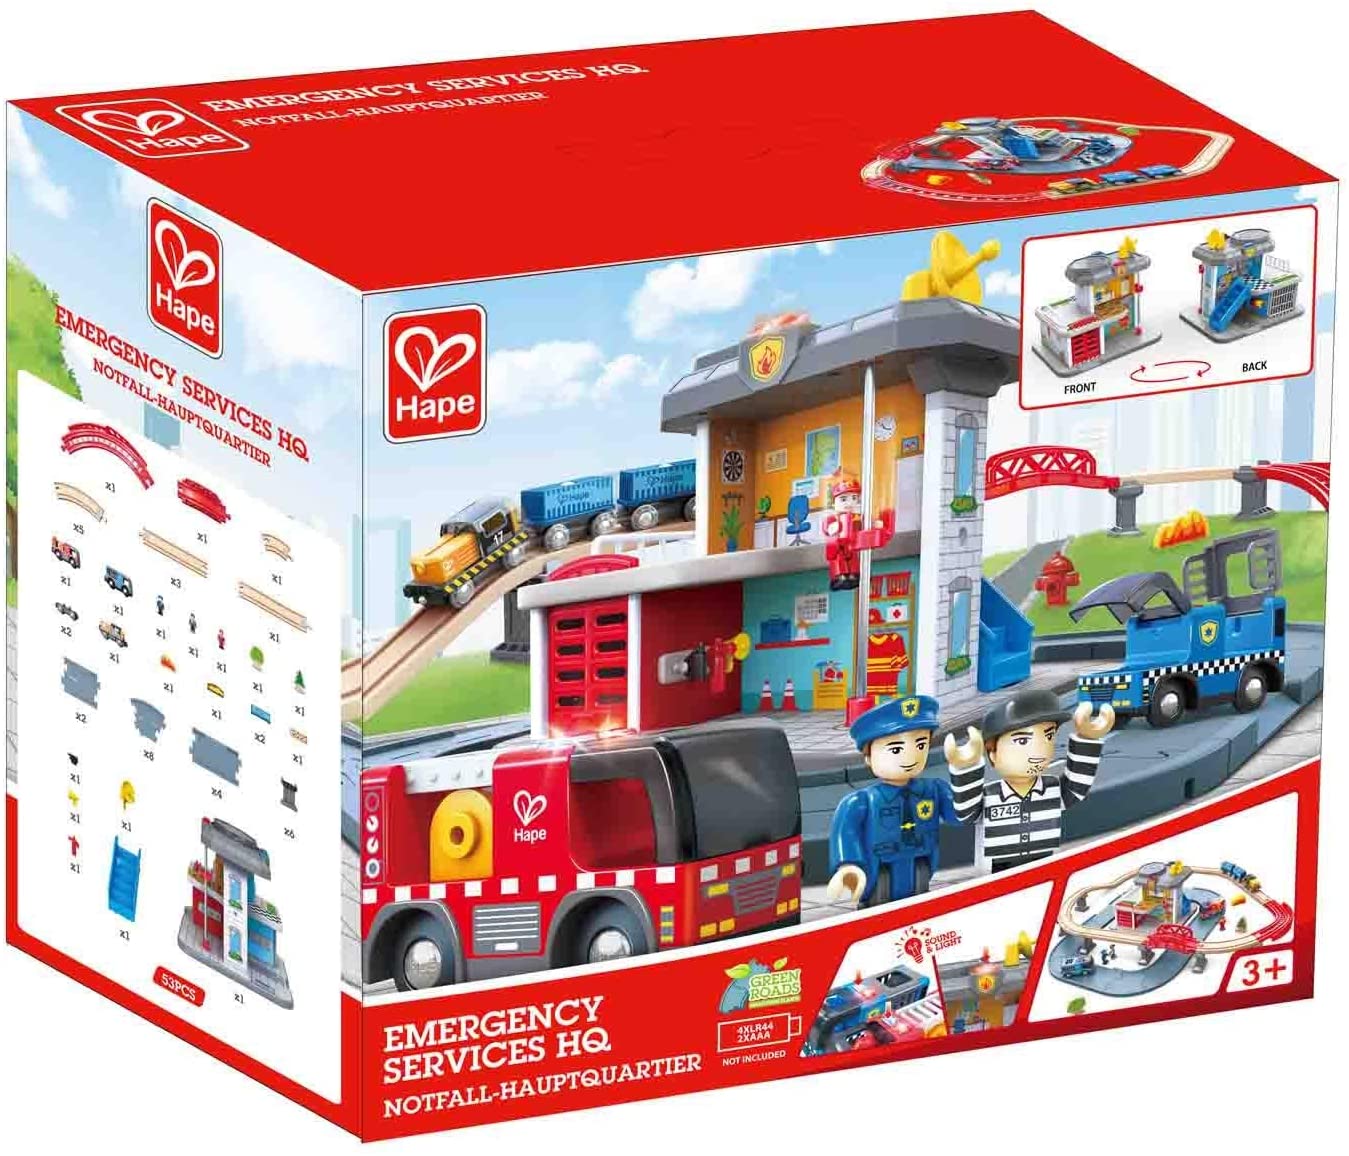 Hape Emergency Services HQ | 2-in-1 Police and Fire Station Complete Play Set with Vehicles and Action Figures Multicolor, L: 33.9, W: 9.1, H: 31.5 inch